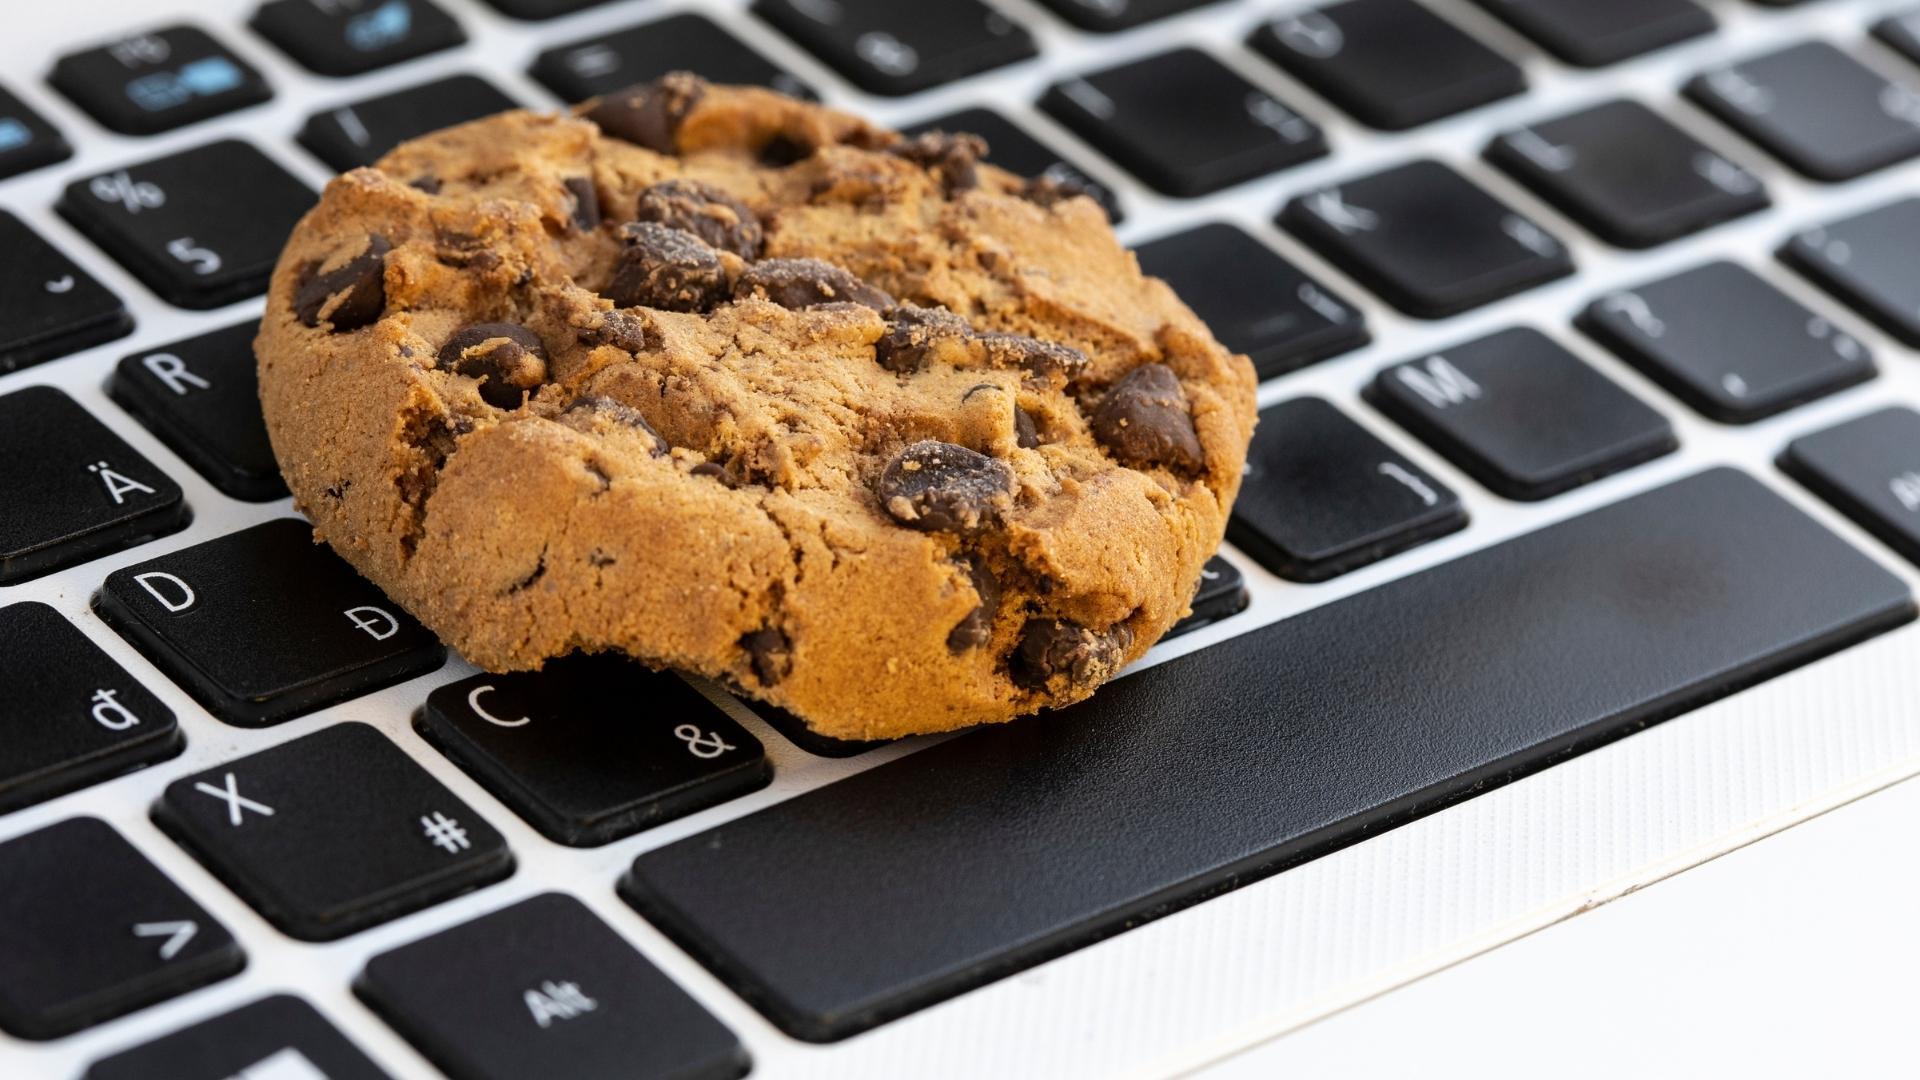 What Are Internet Cookies?